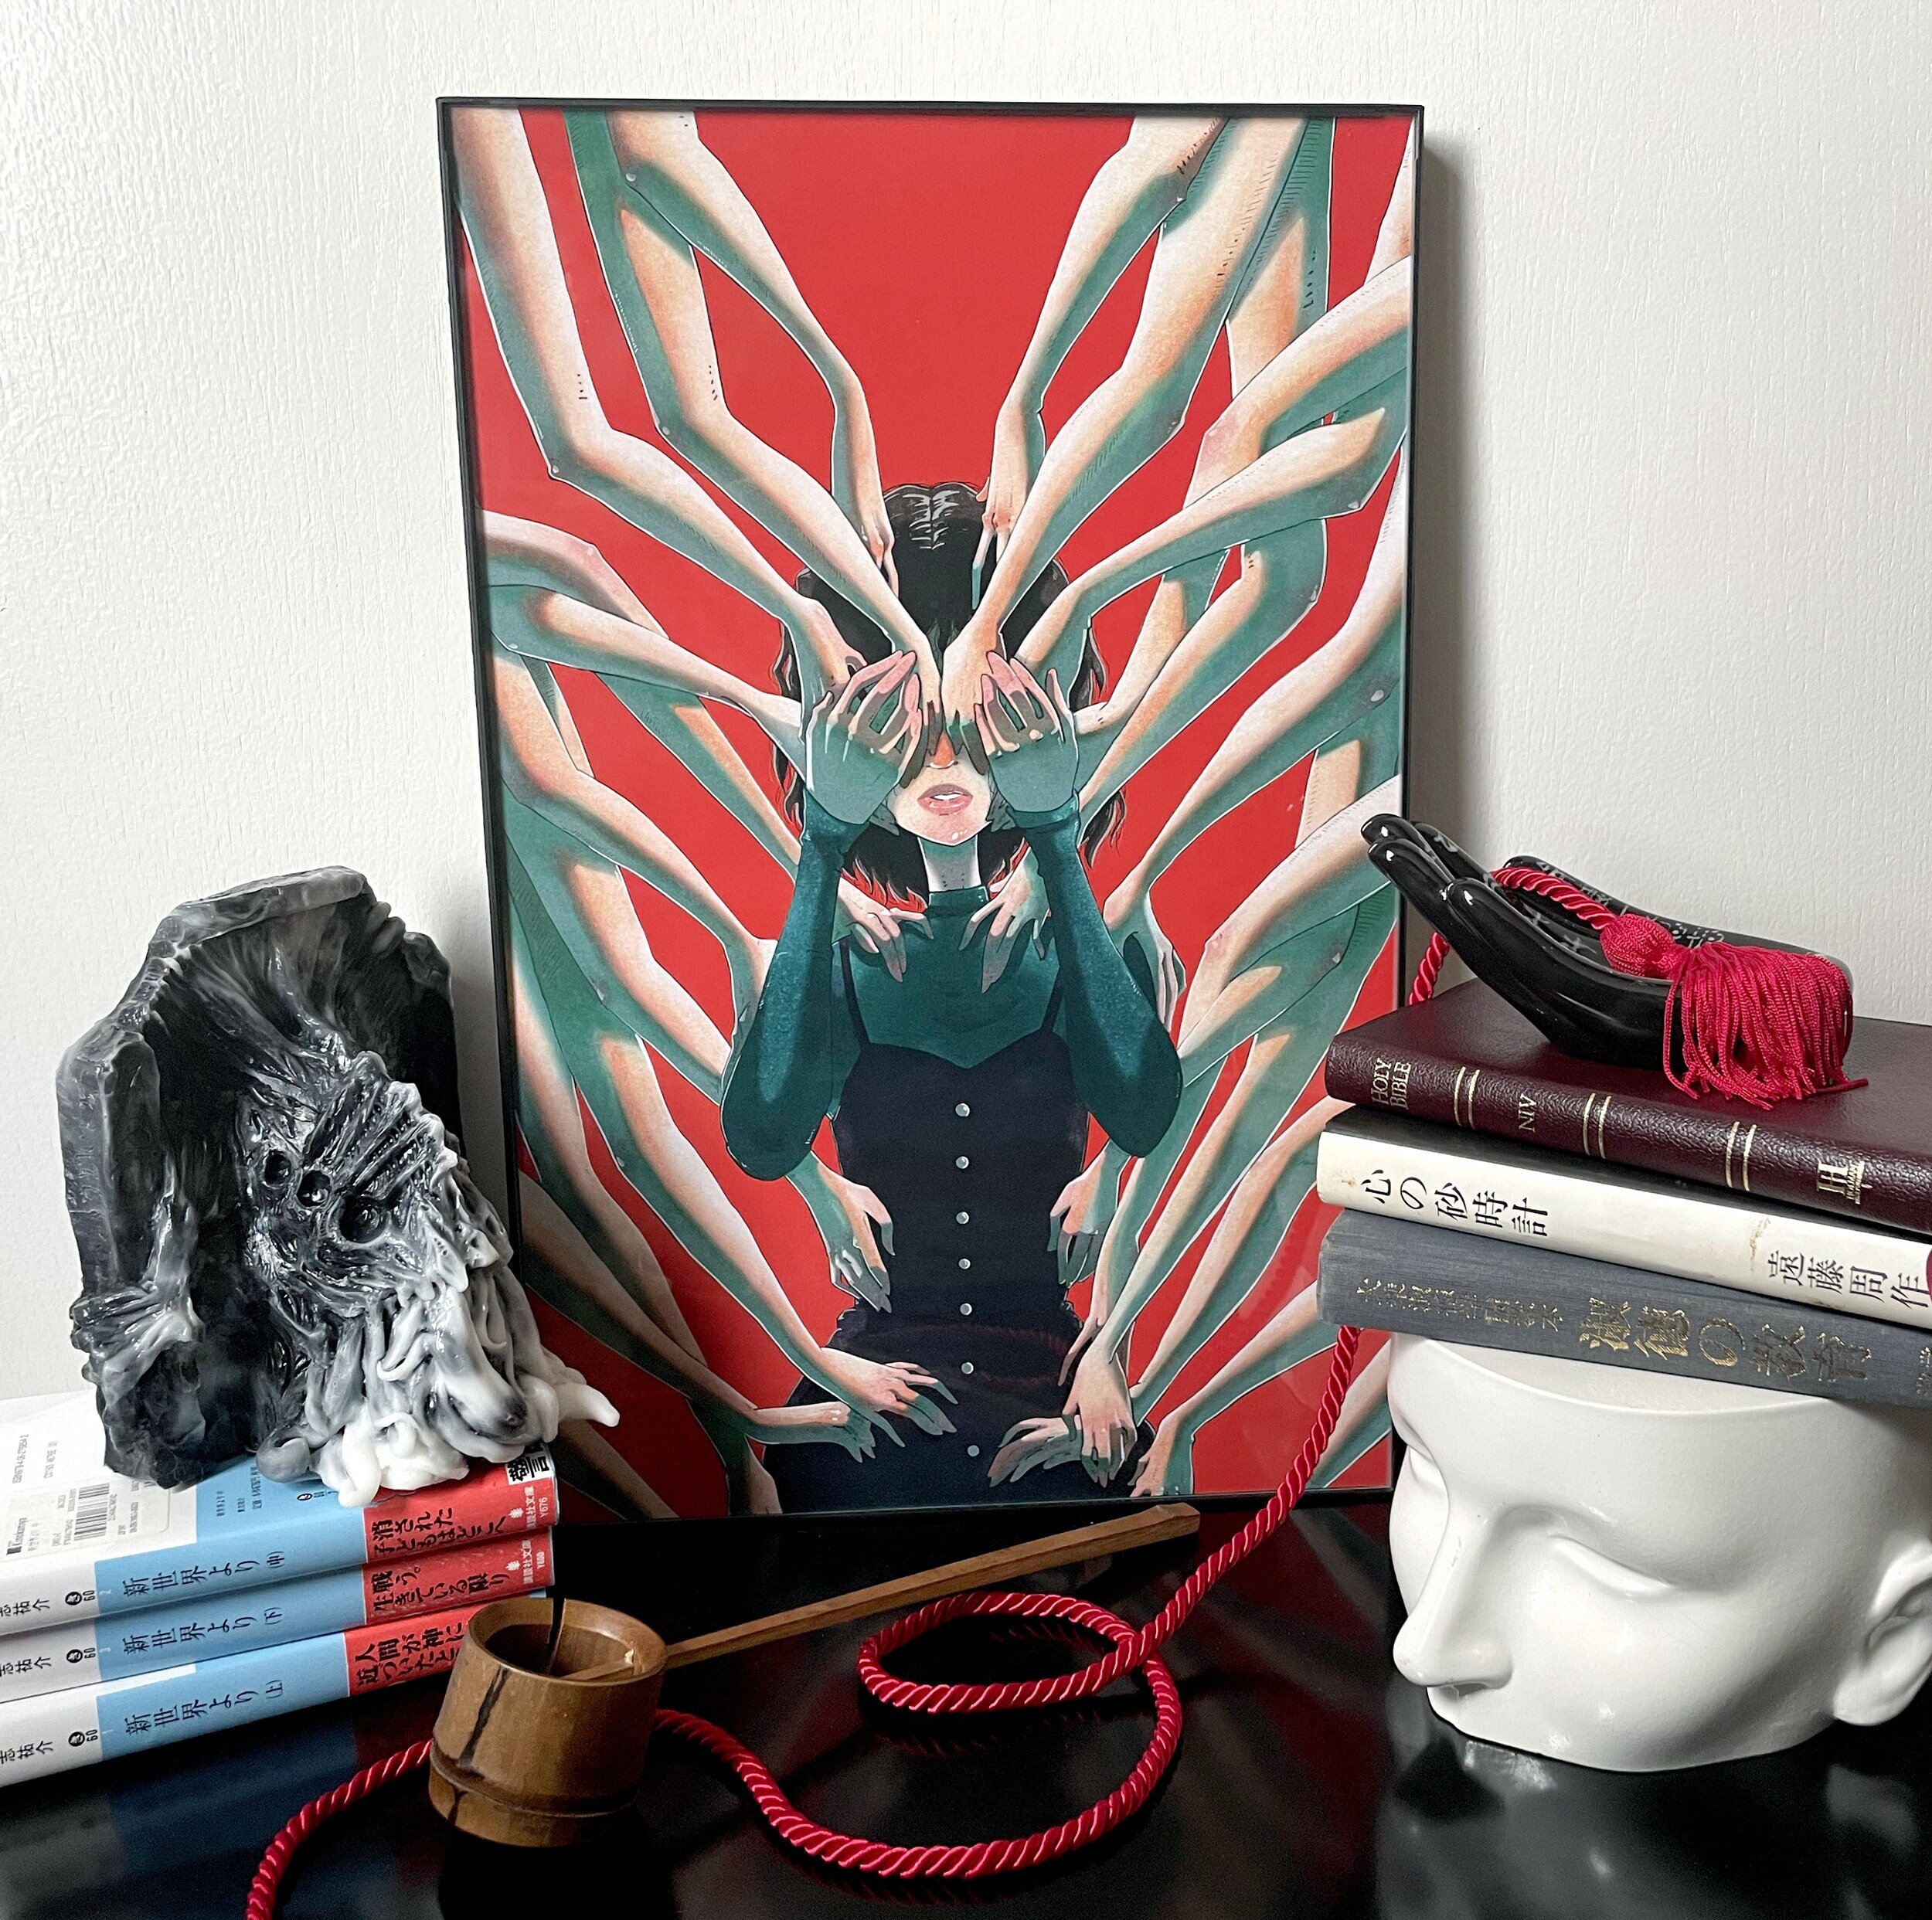 Japanese Surreal Anime Revue Starlight Poster Room Aesthetic Poster Print  Art Wall Painting Canvas Posters Gifts Modern Bedroom Decor  12x18inch(30x45cm) : Amazon.ca: Home